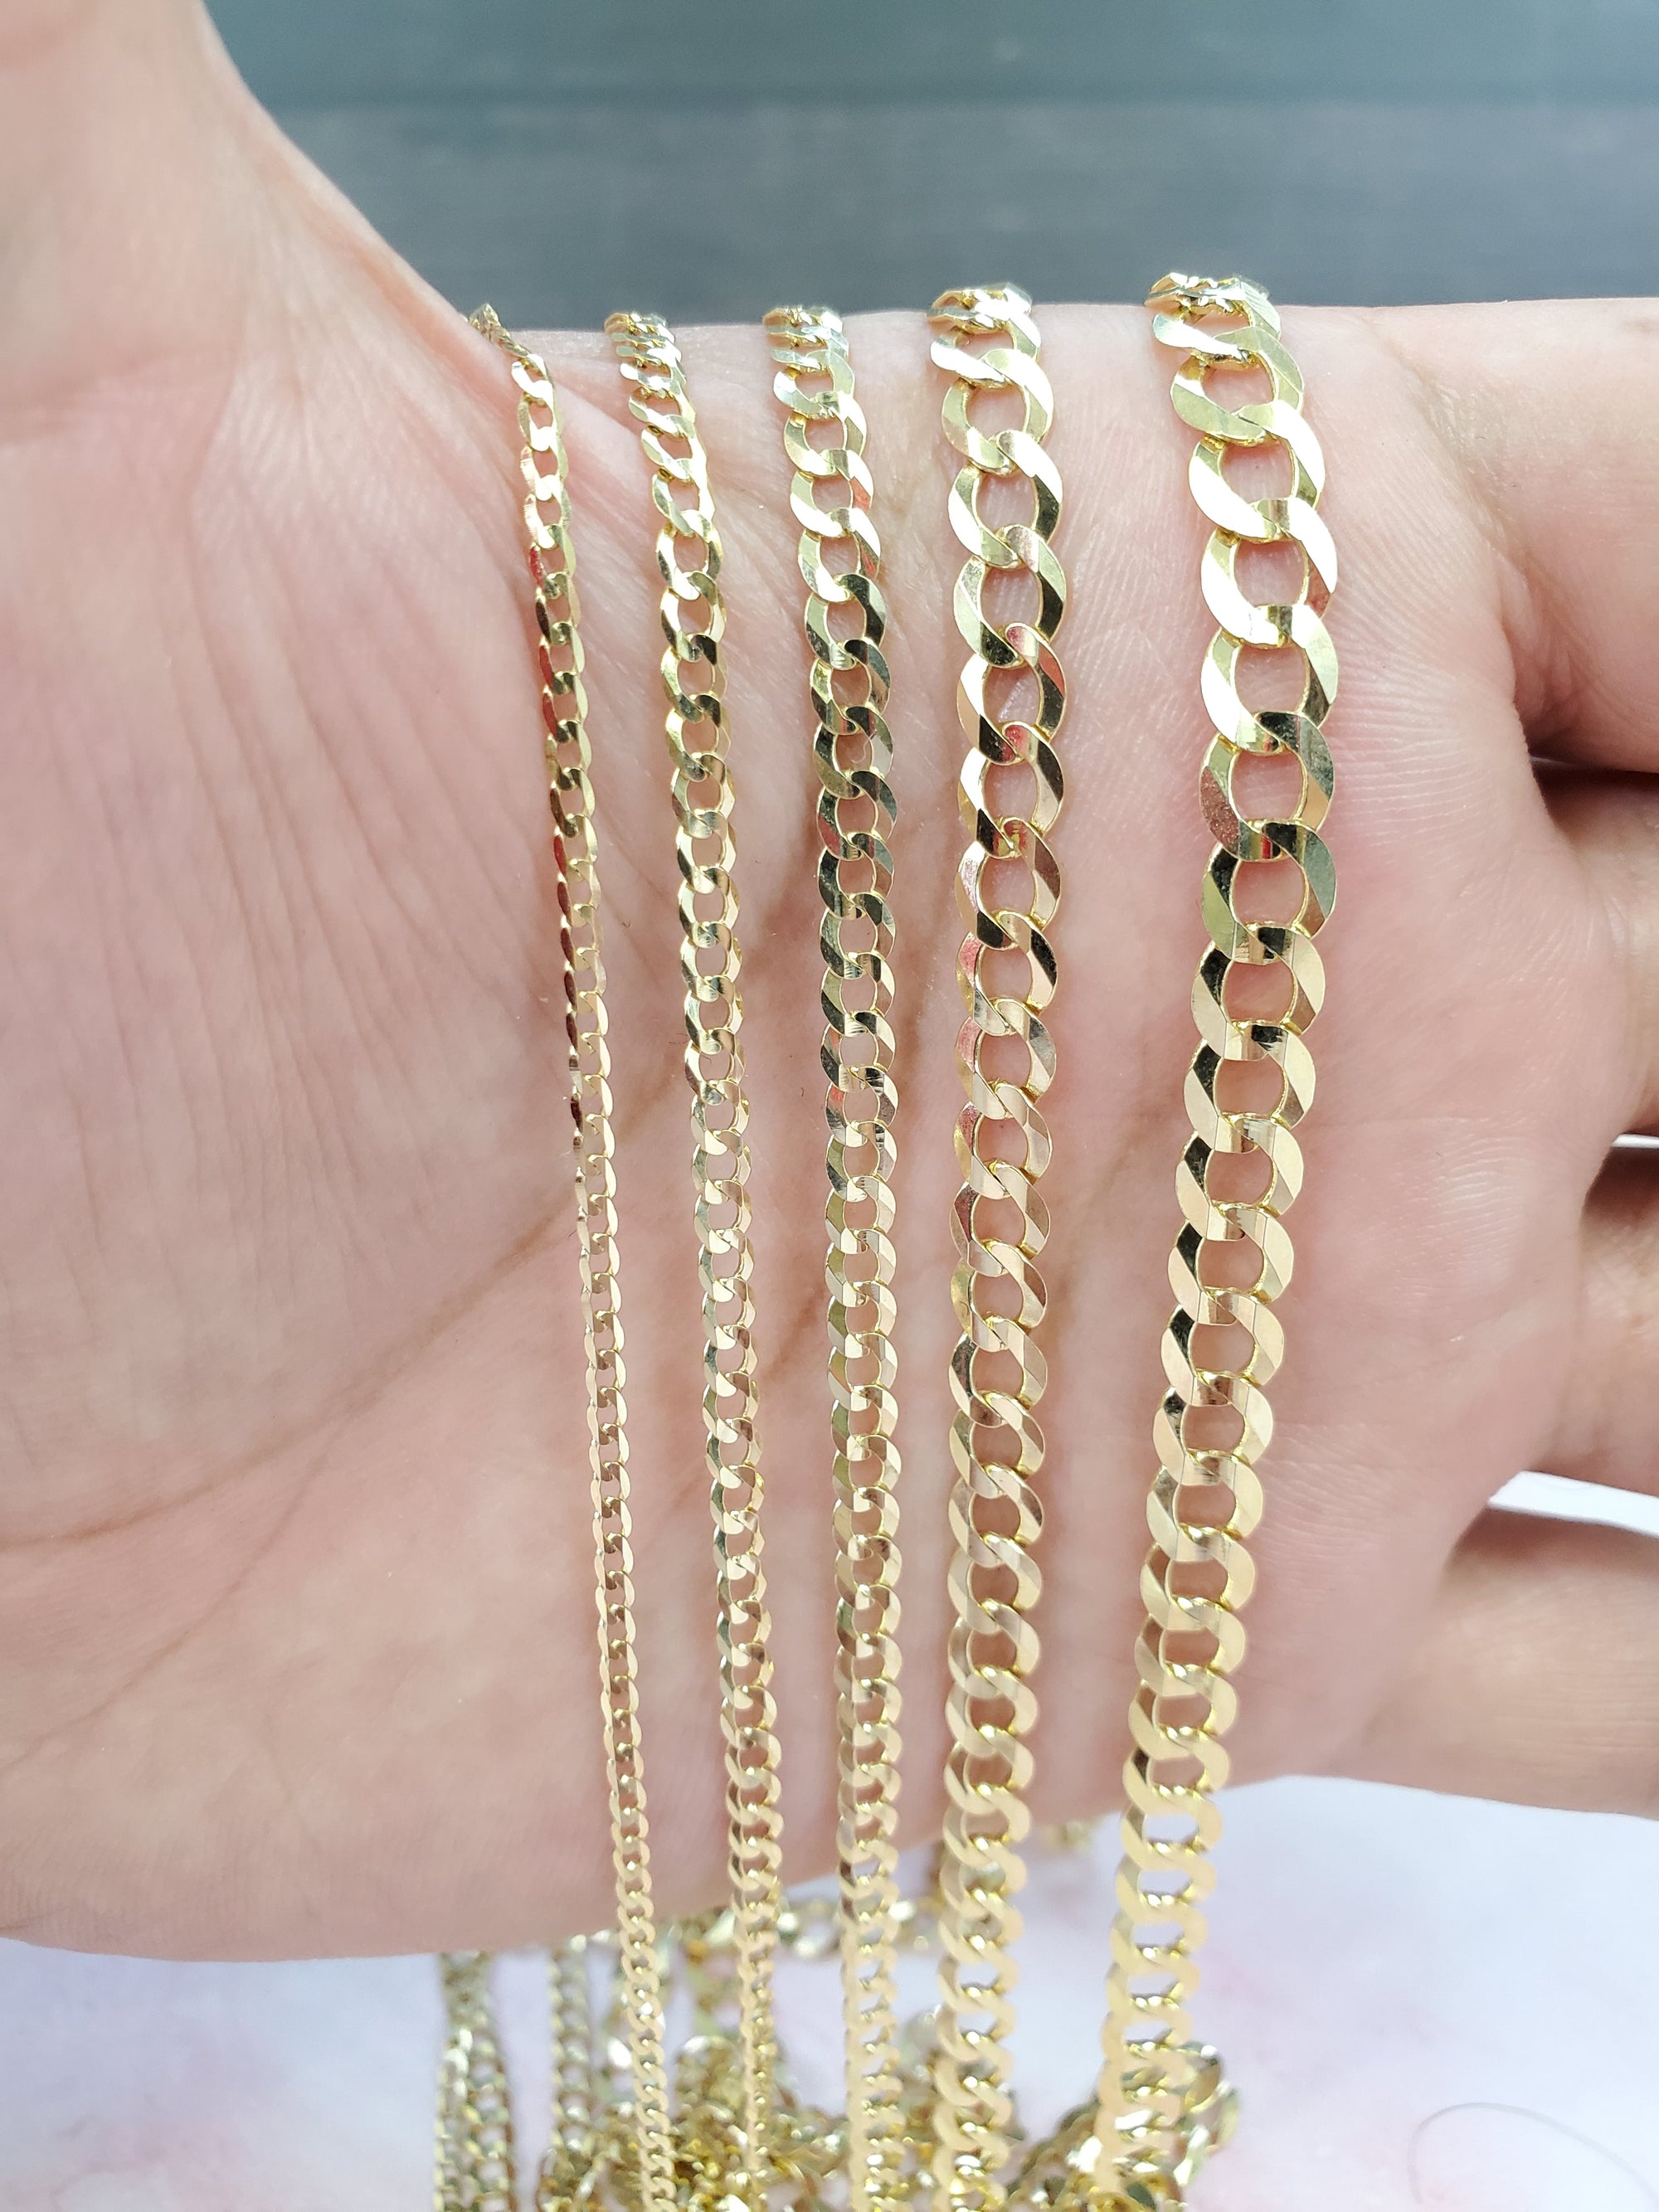 Real 10K Solid Yellow Gold Cuban Chain 2.5MM to 5.5MM